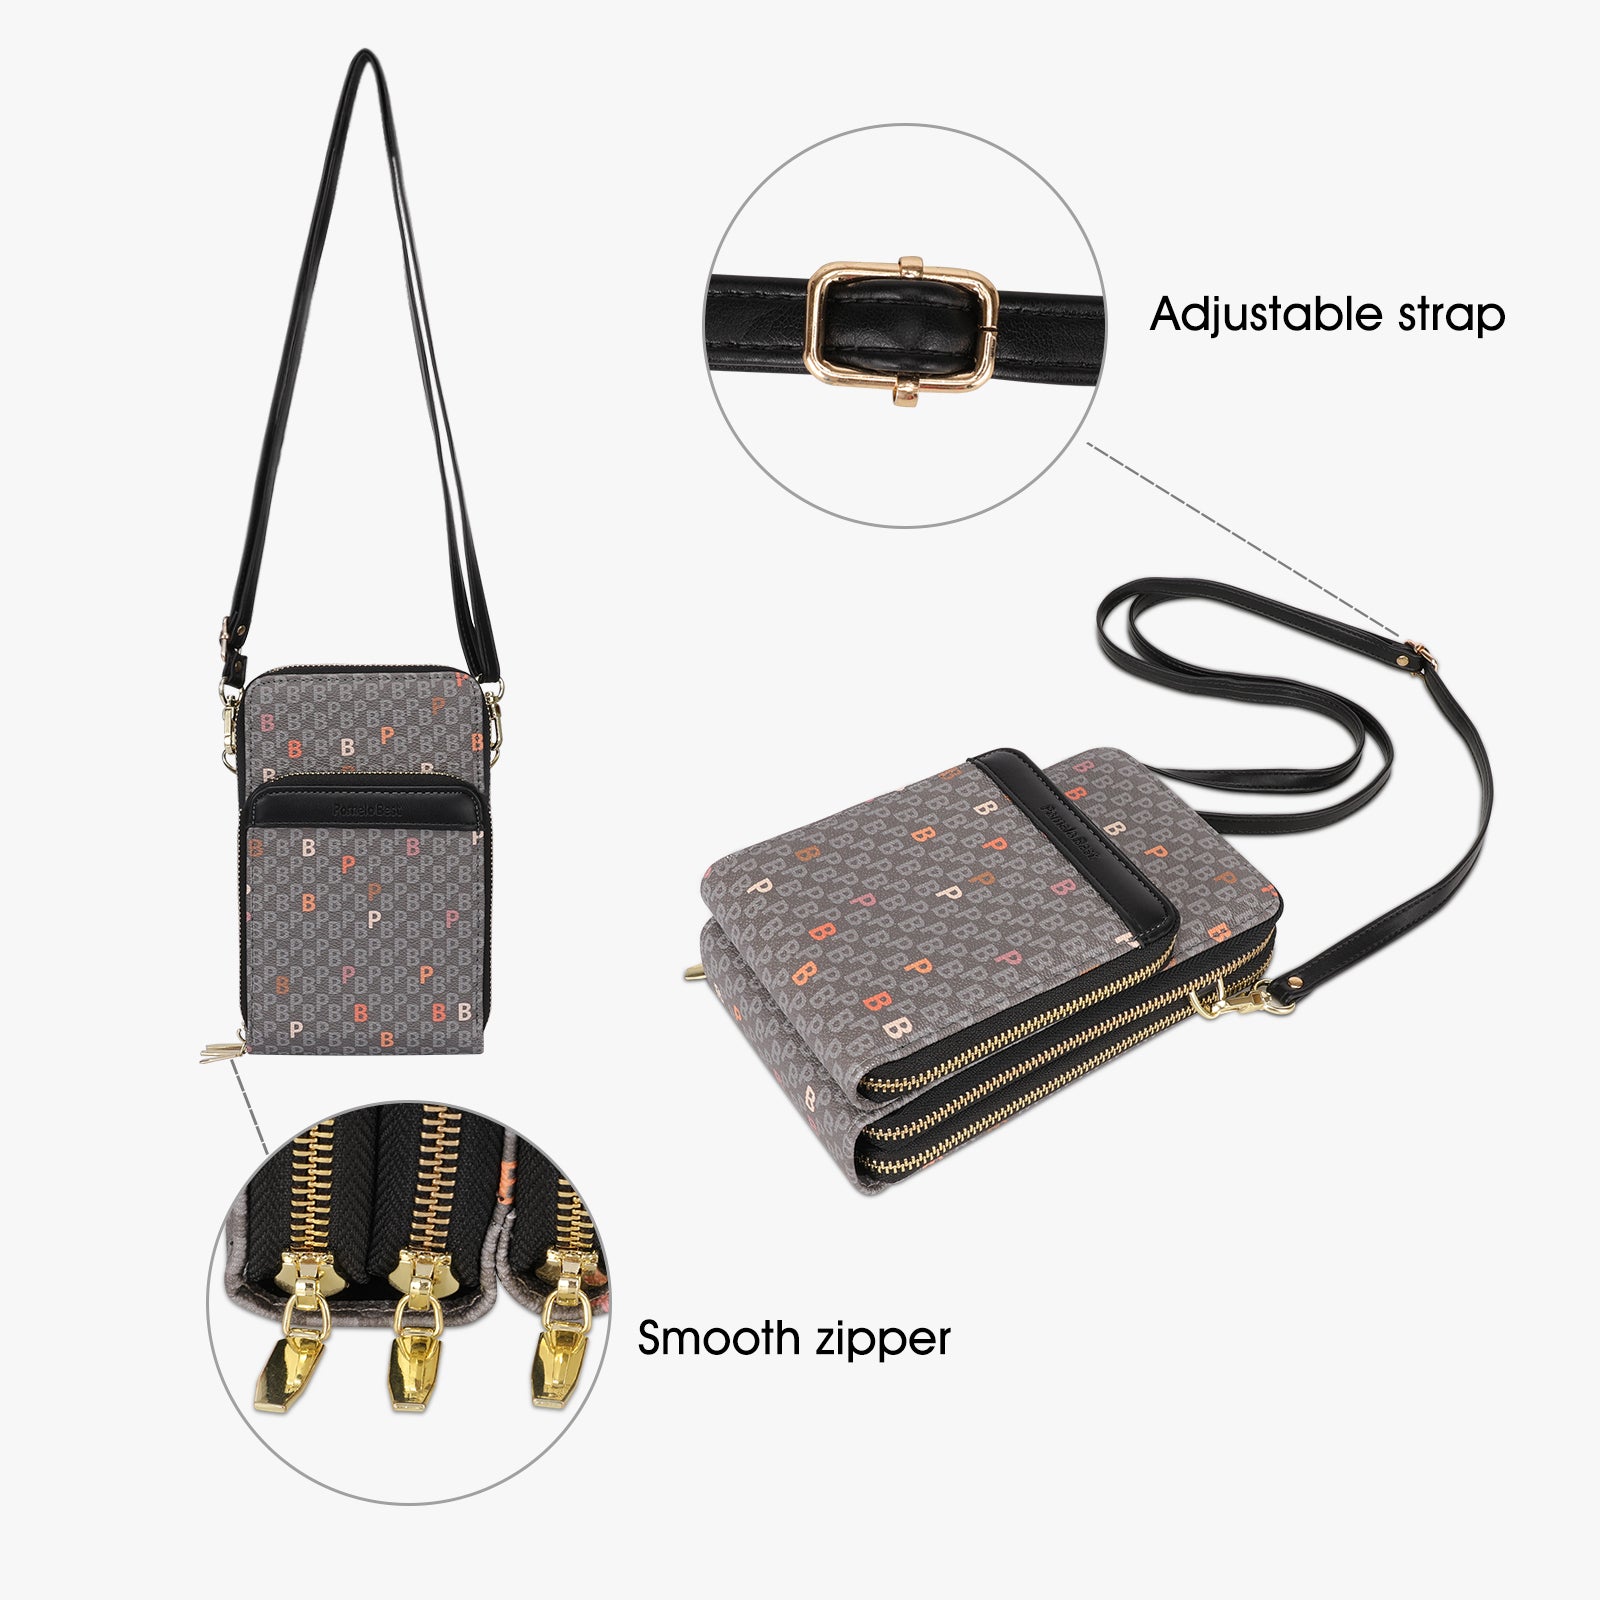 Small Crossbody Bags for Women, Sling Cell Phone Bag Leather Crossbody Purse, Mini Over the Shoulder Bag with Adjustable Strap